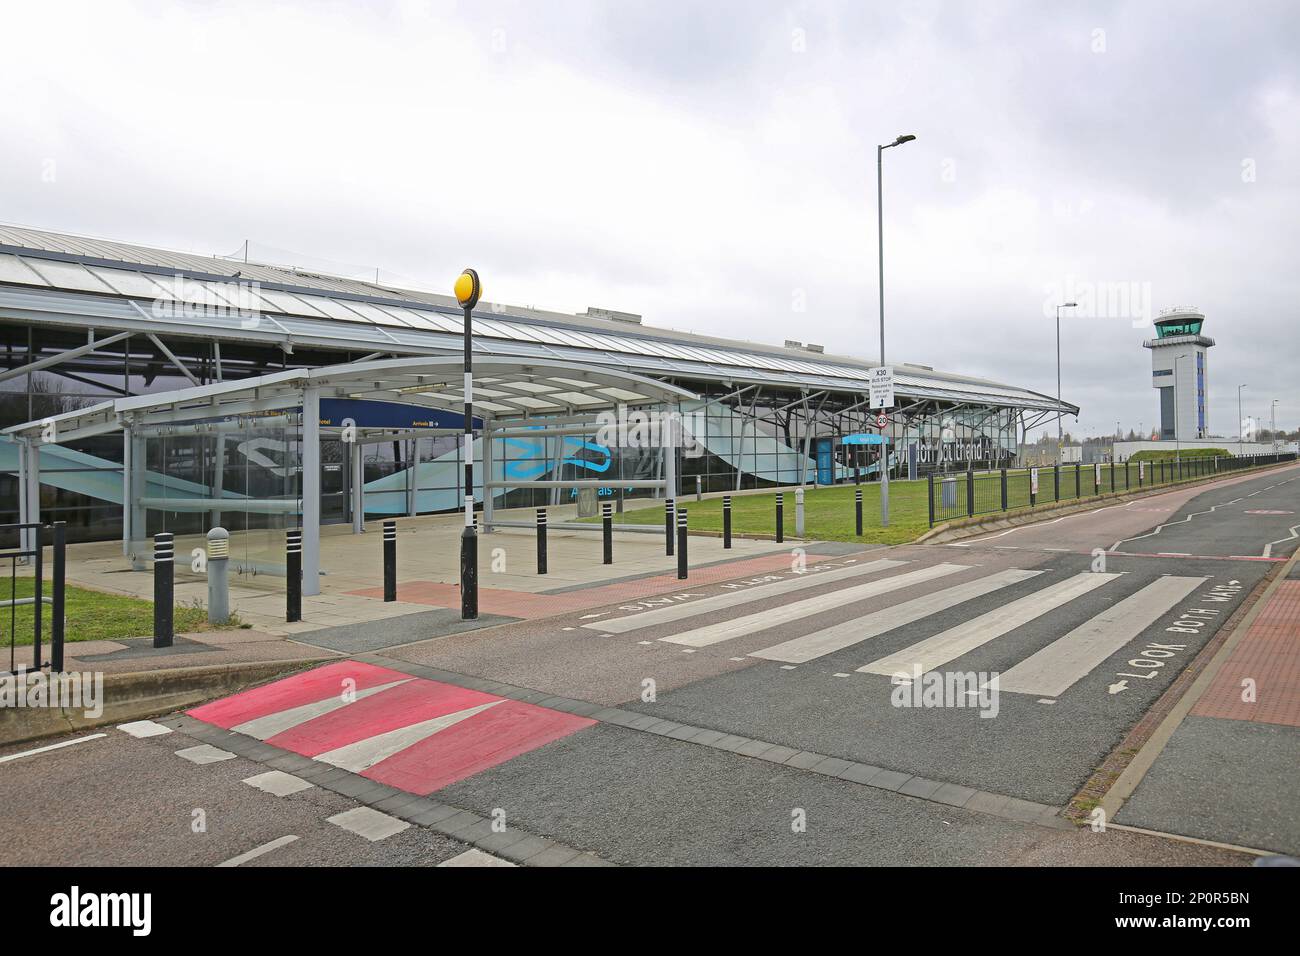 Exterior of main terminal building at London Southend Airport, Essex, UK. The airport appears deserted. Stock Photo